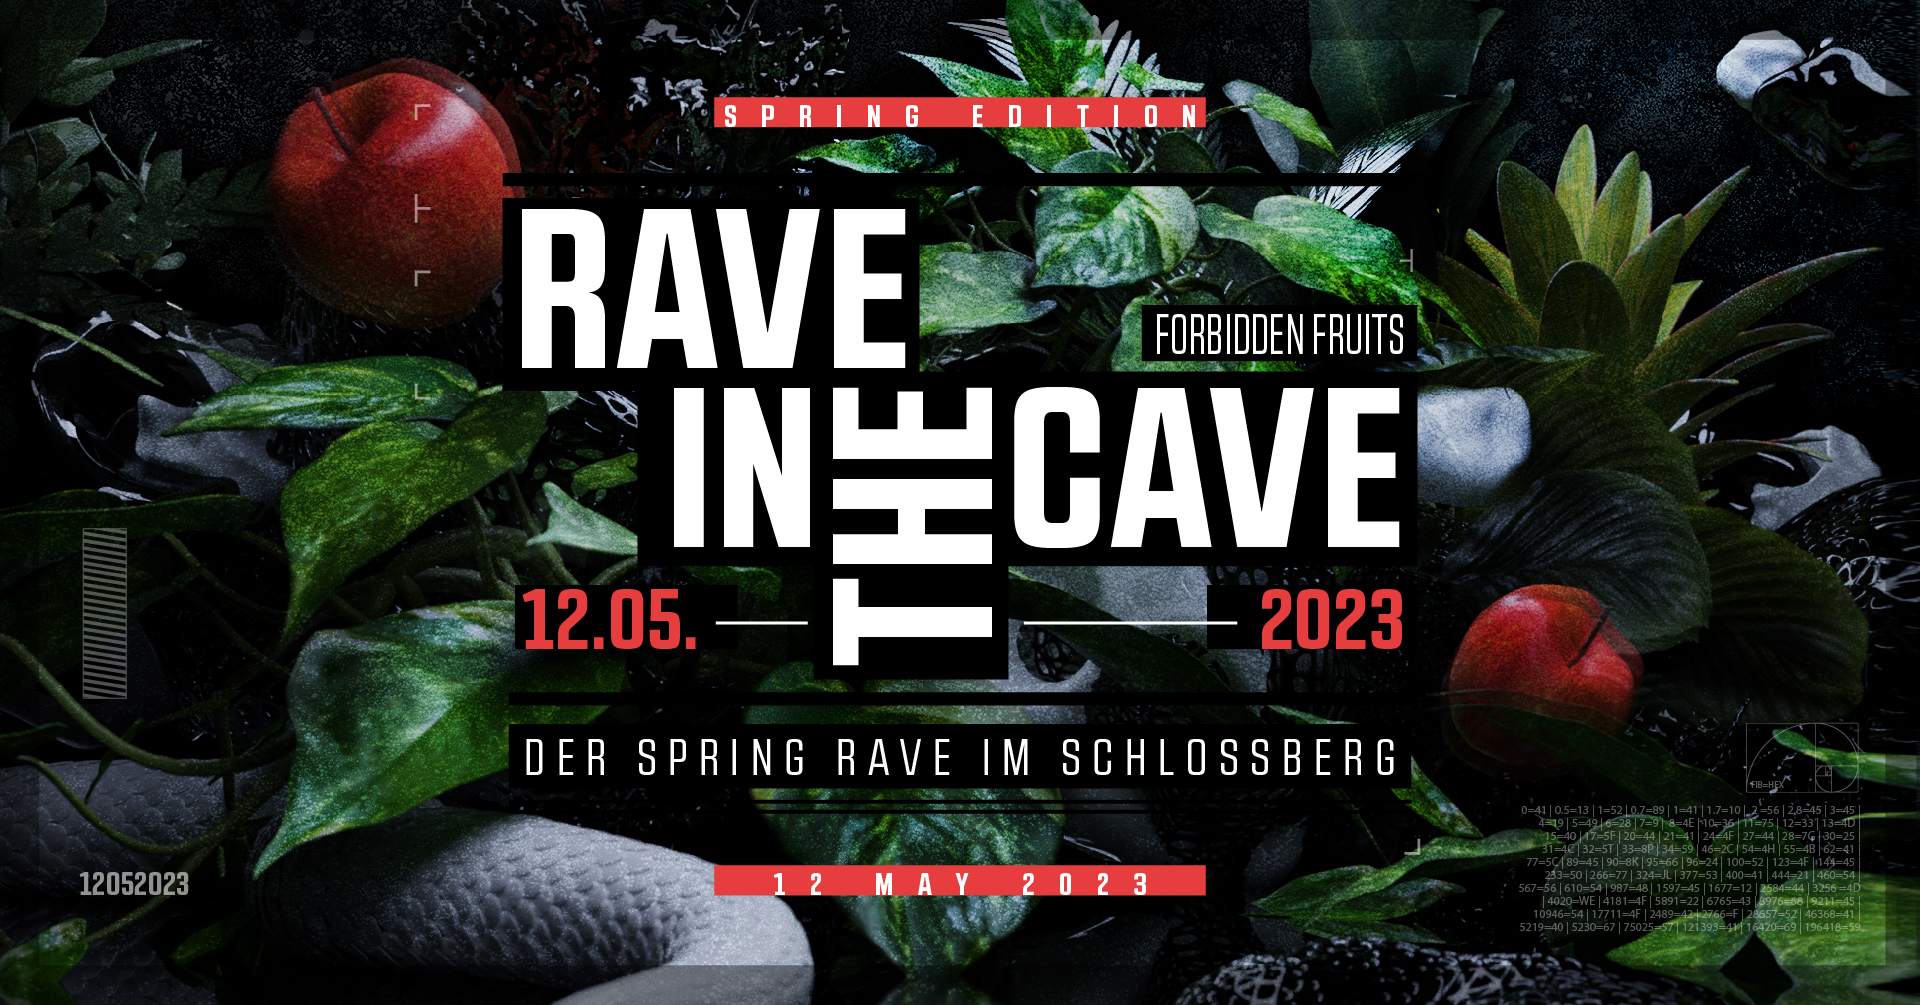 Rave in the Cave - SPRING EDITION 2023 - フライヤー表